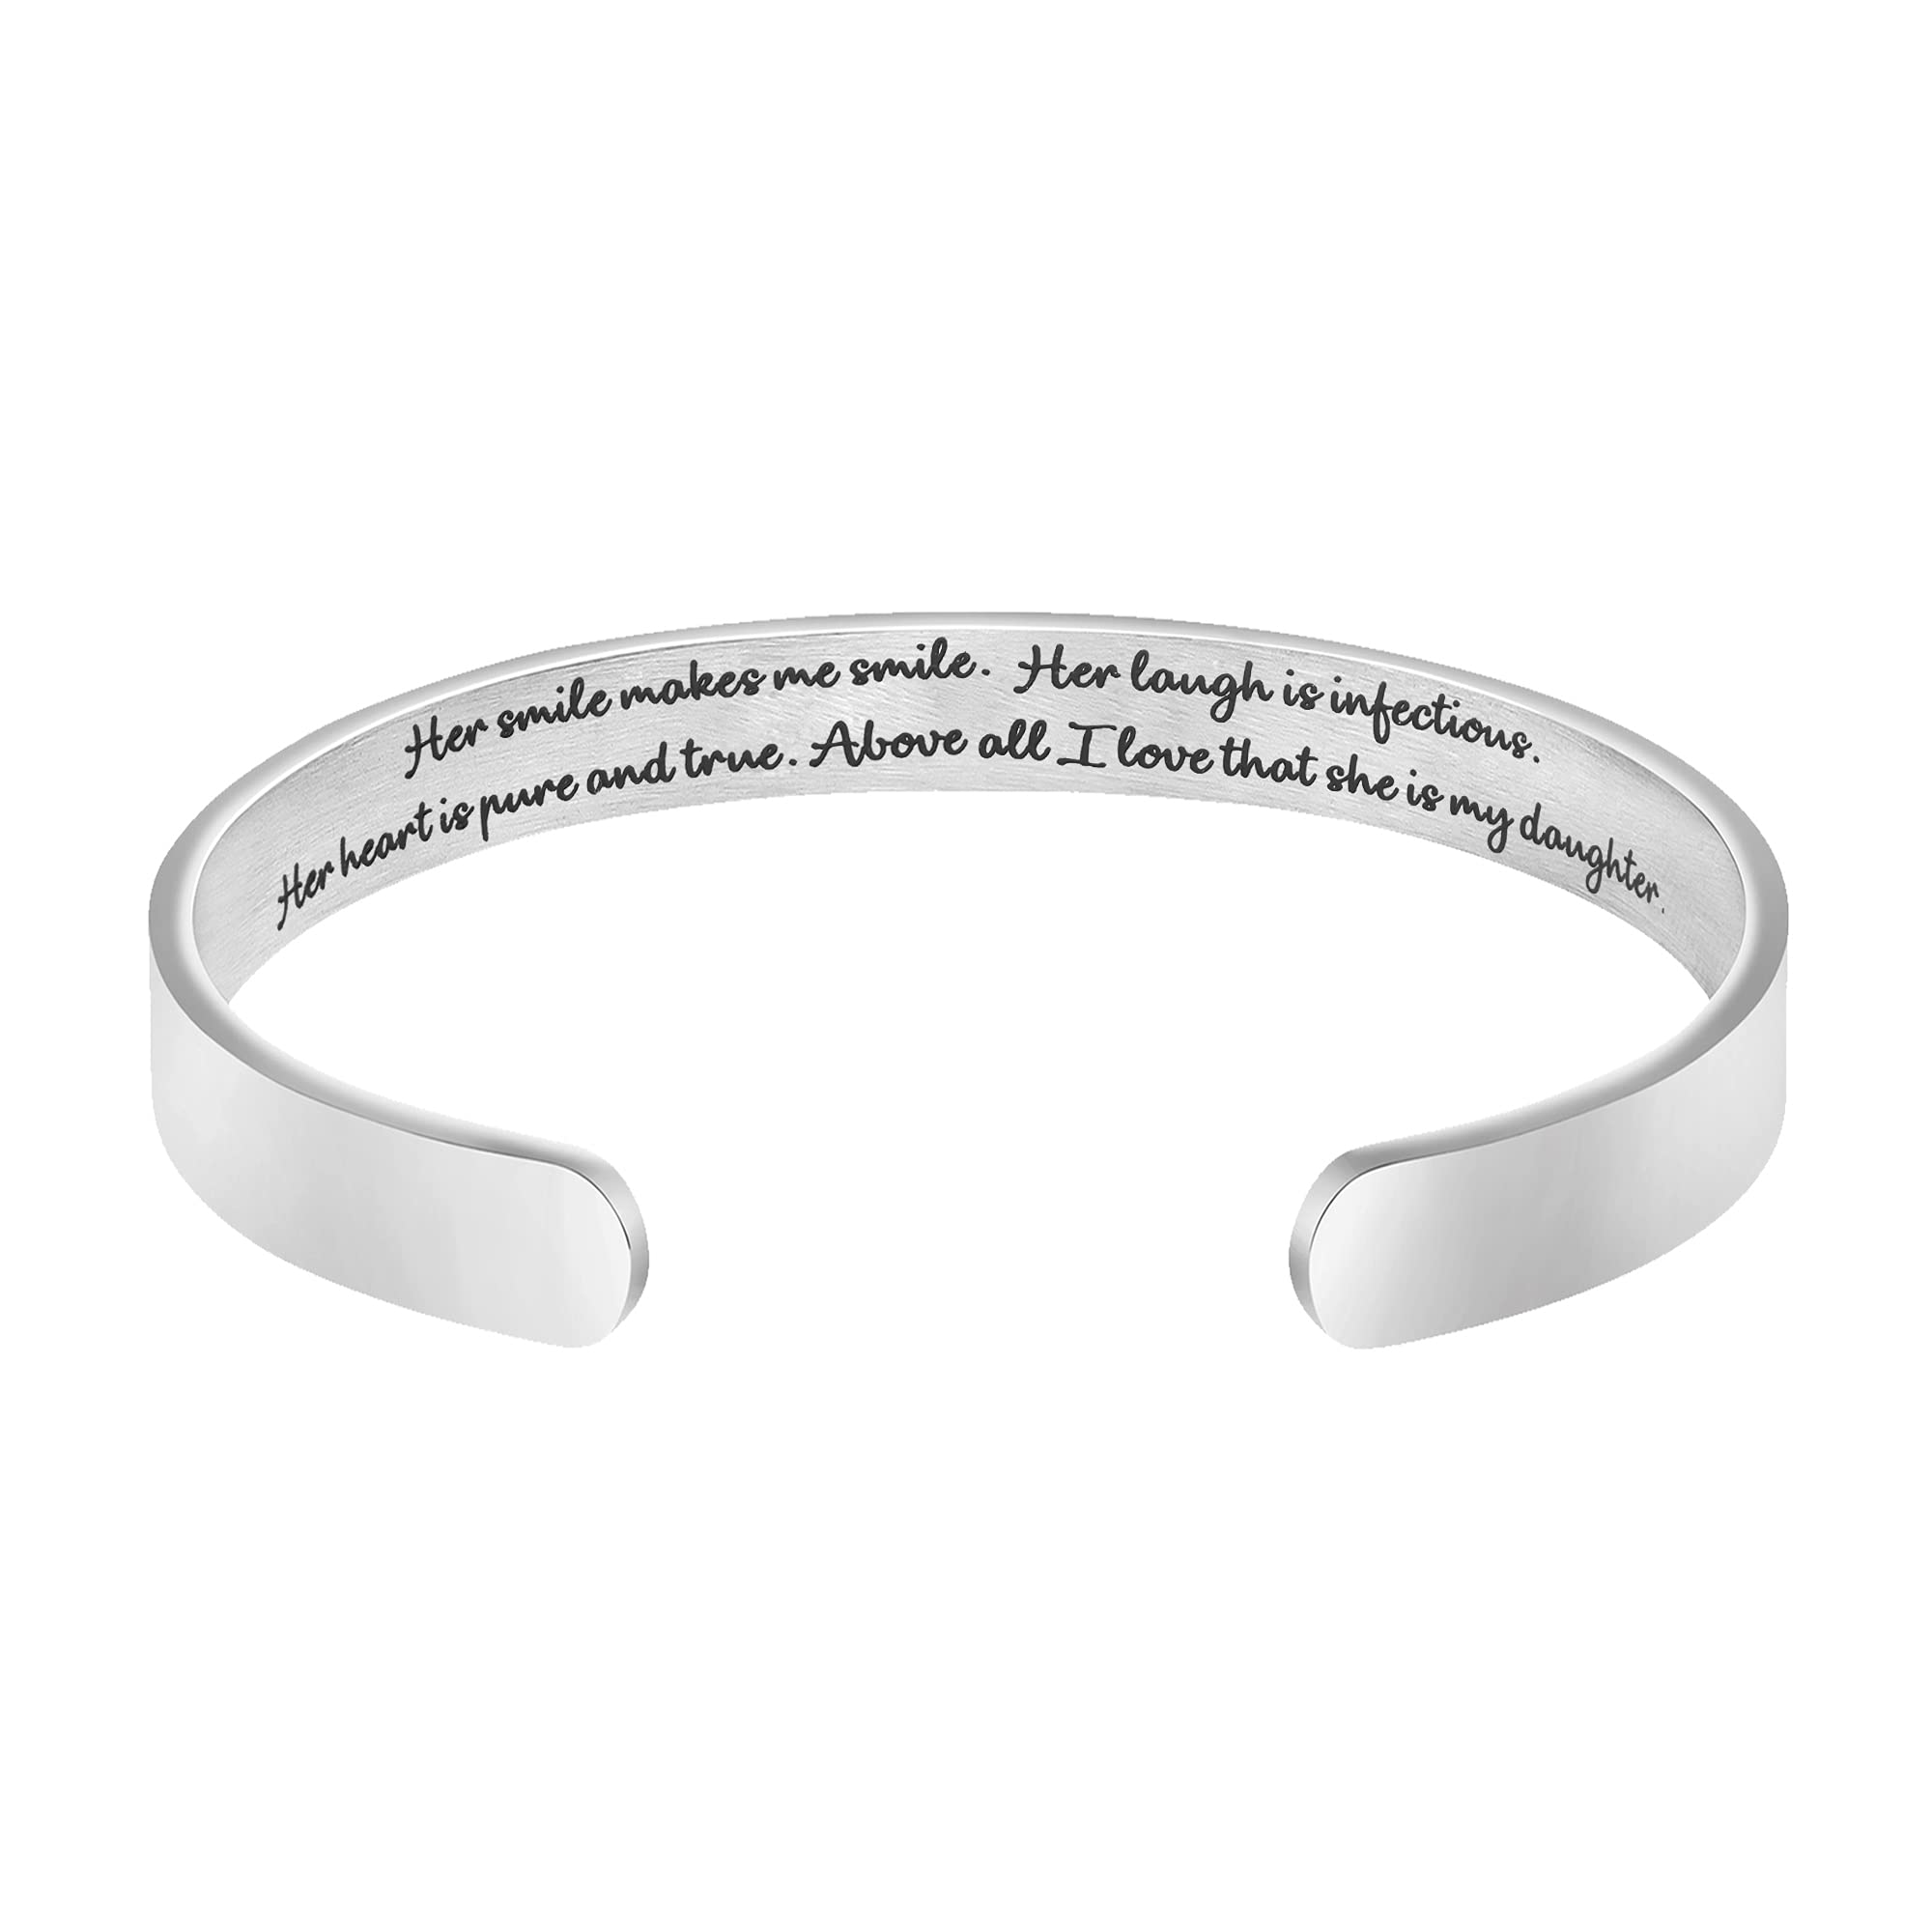 JoycuFF Daughter Gifts from Mom Dad Bracelets for Women Daughter Inspirational Jewelry Encouragement Bangle Stainless Steel Meta